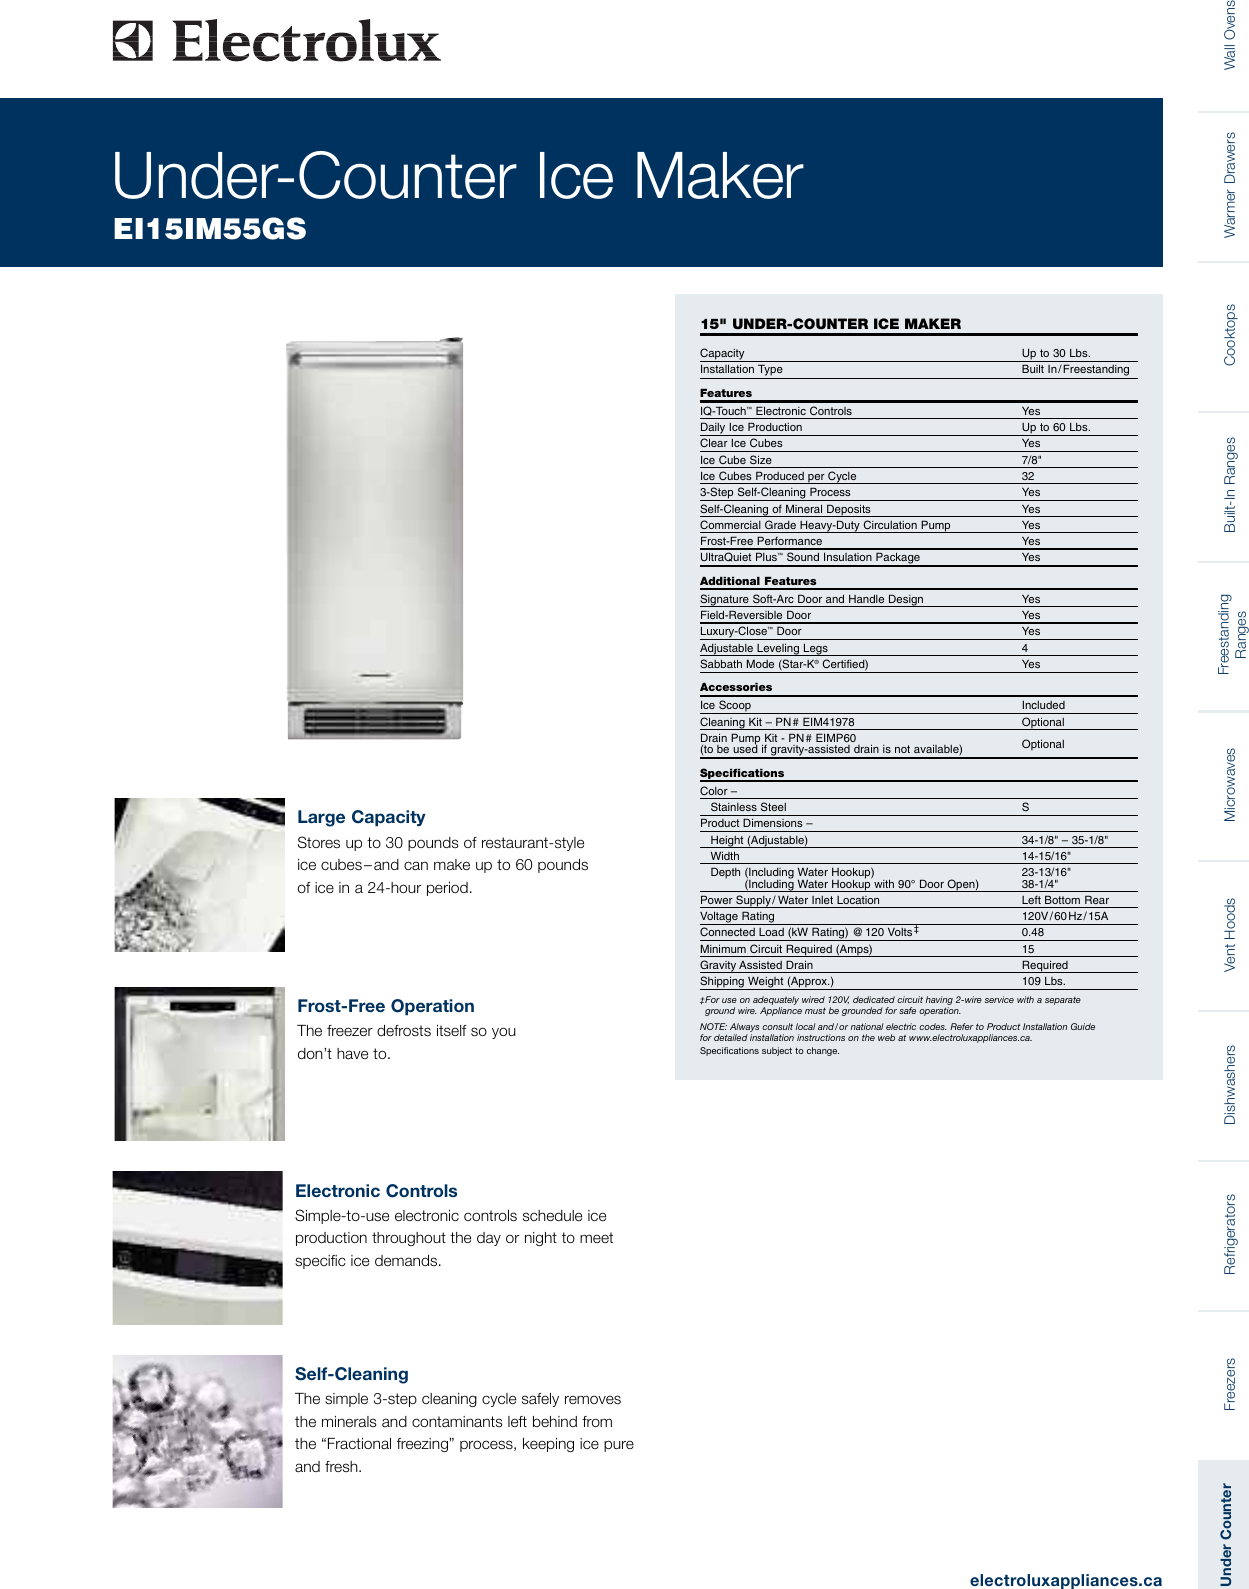 Page 1 of 2 - Electrolux Electrolux-15-Under-Counter-Ice-Maker-Ei15Im55Gs-Product-Specifications-Sheet-  Electrolux-15-under-counter-ice-maker-ei15im55gs-product-specifications-sheet